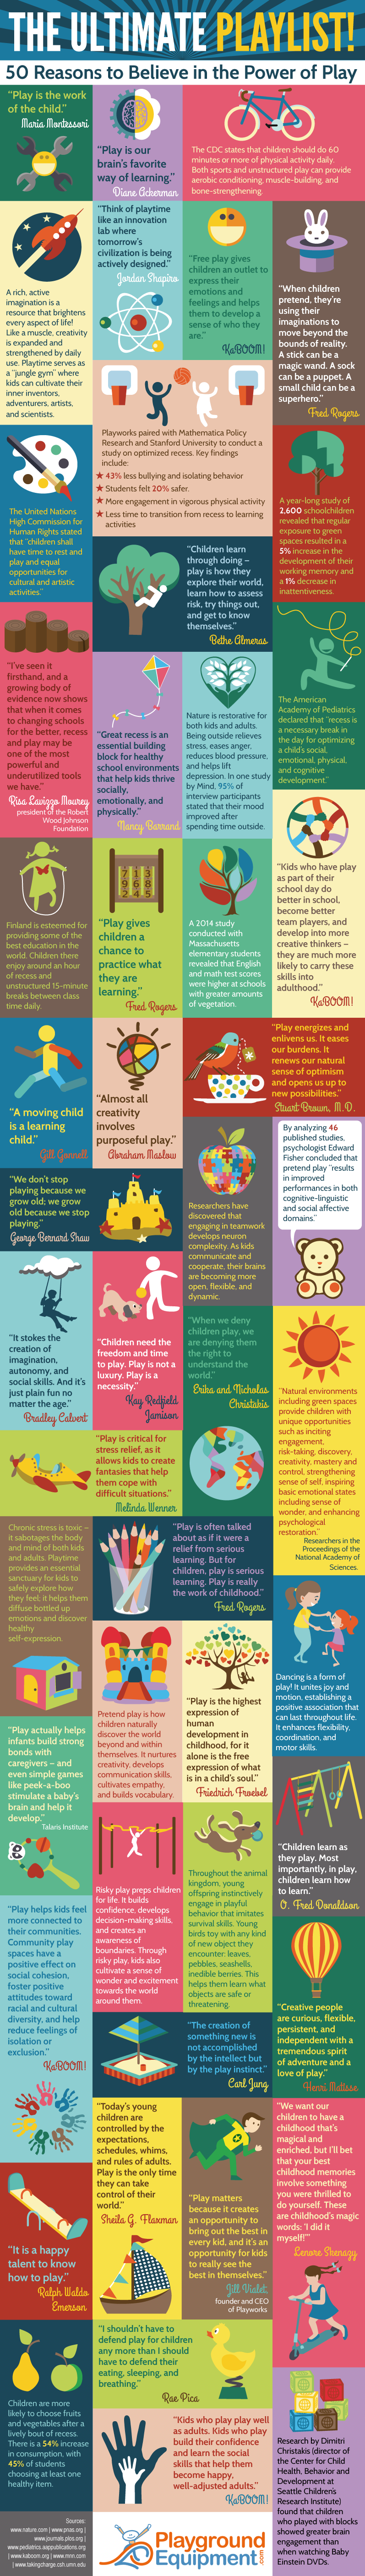 The Ultimate Playlist: 50 Reasons to Believe in the Power of Play - PlaygroundEquipment.org - Infographic